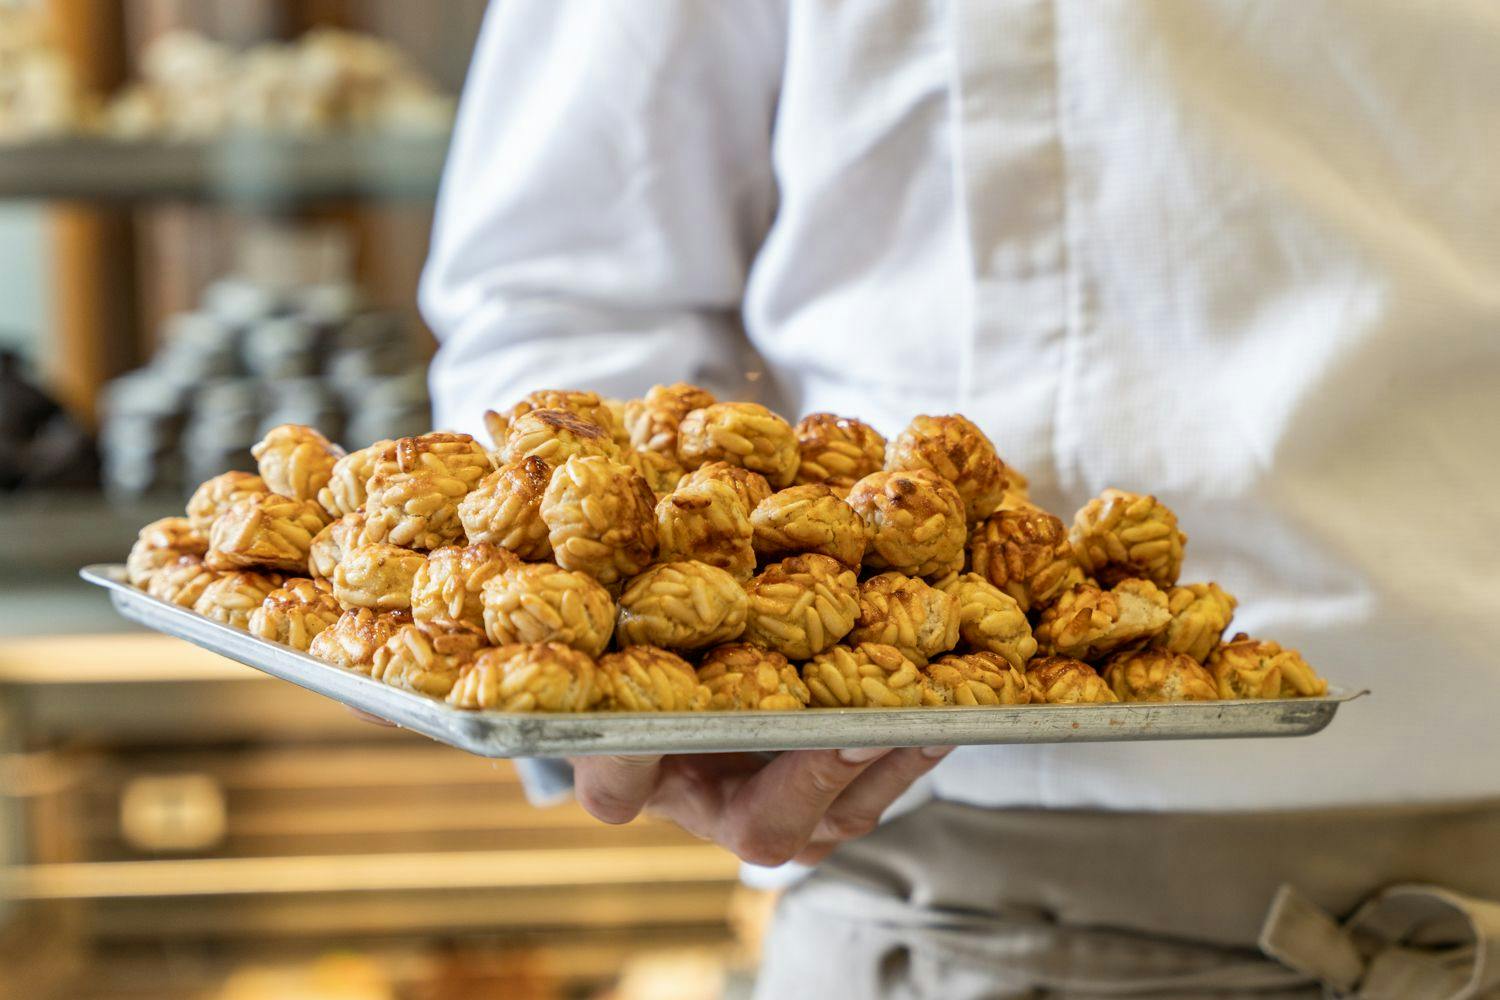 The best 'panellets' in Barcelona to enjoy on Halloween